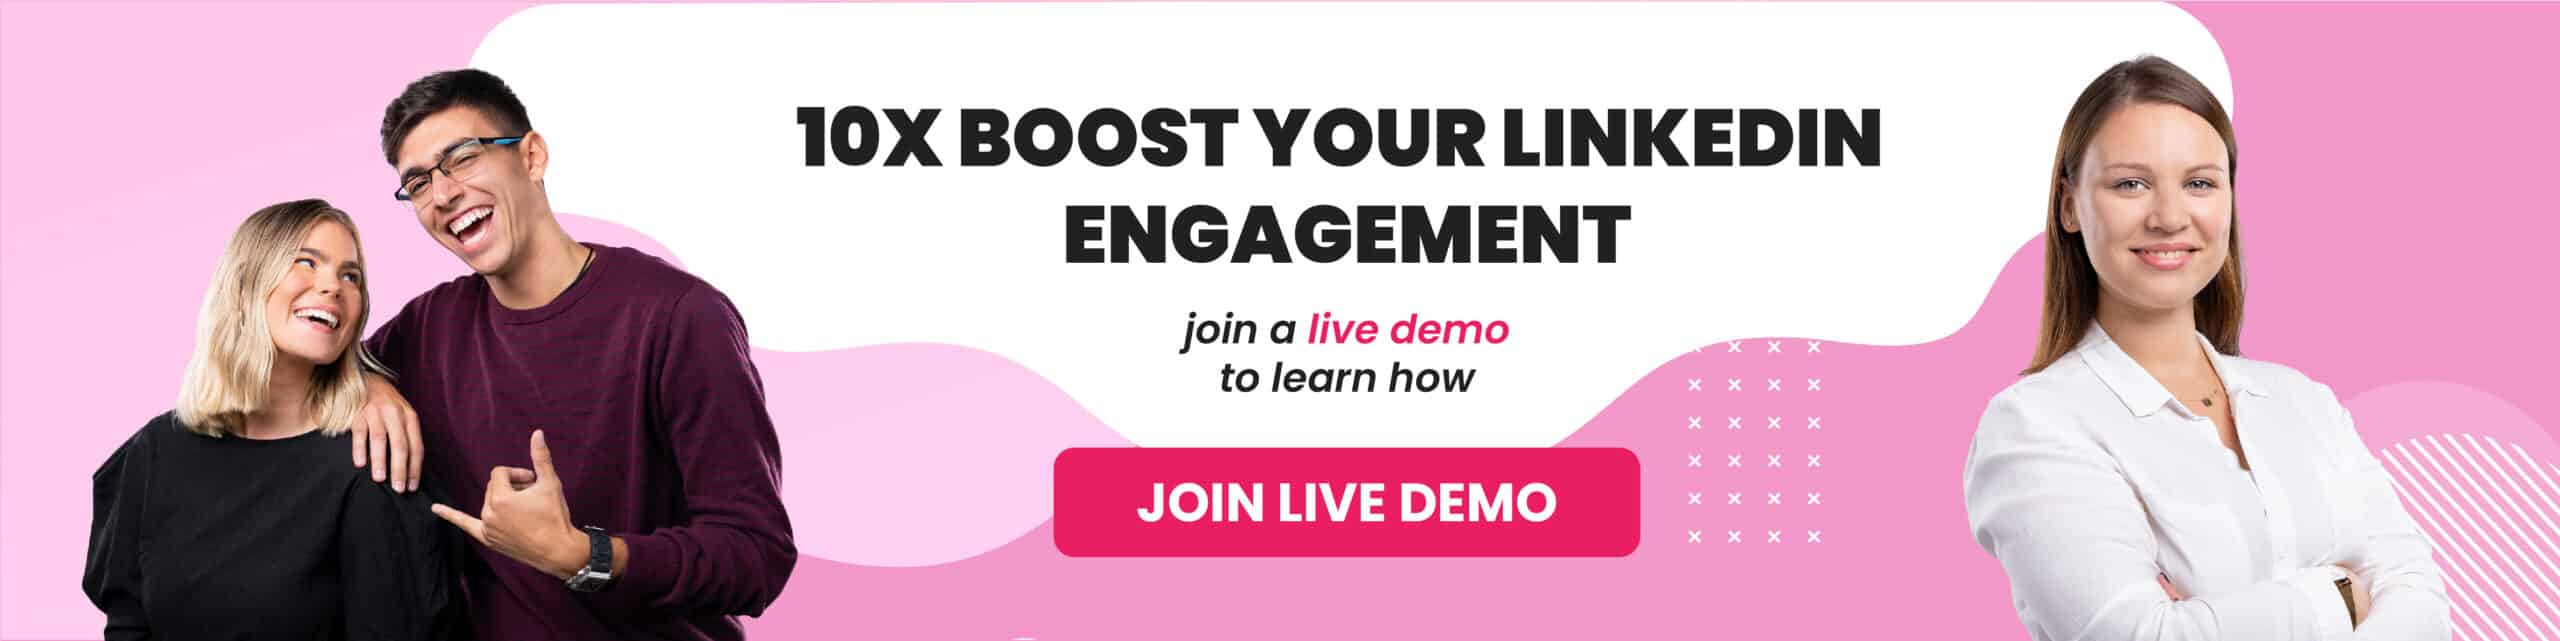 Join-live-demo